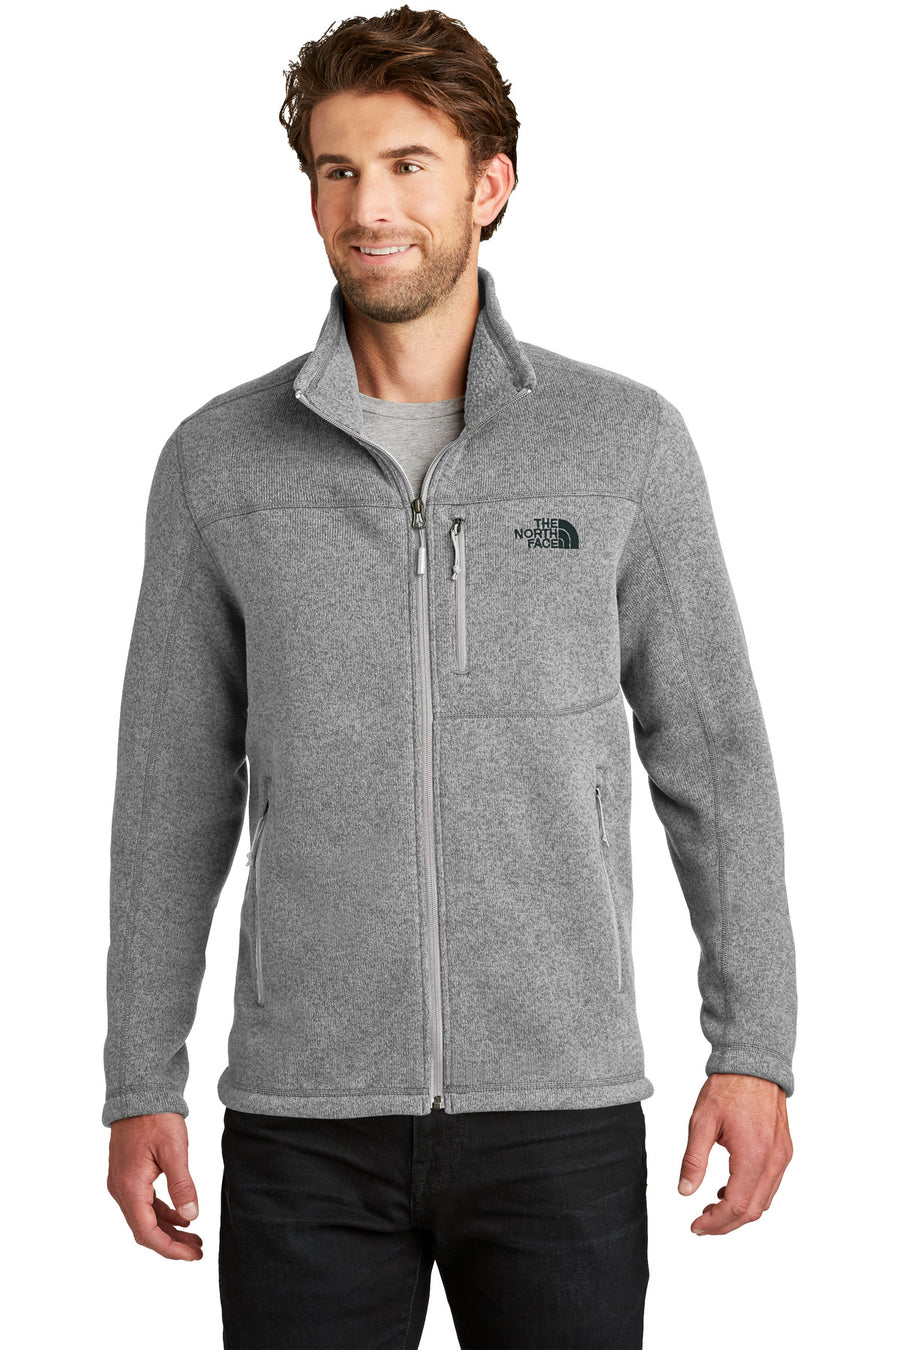 The North Face Sweater Fleece Jacket.